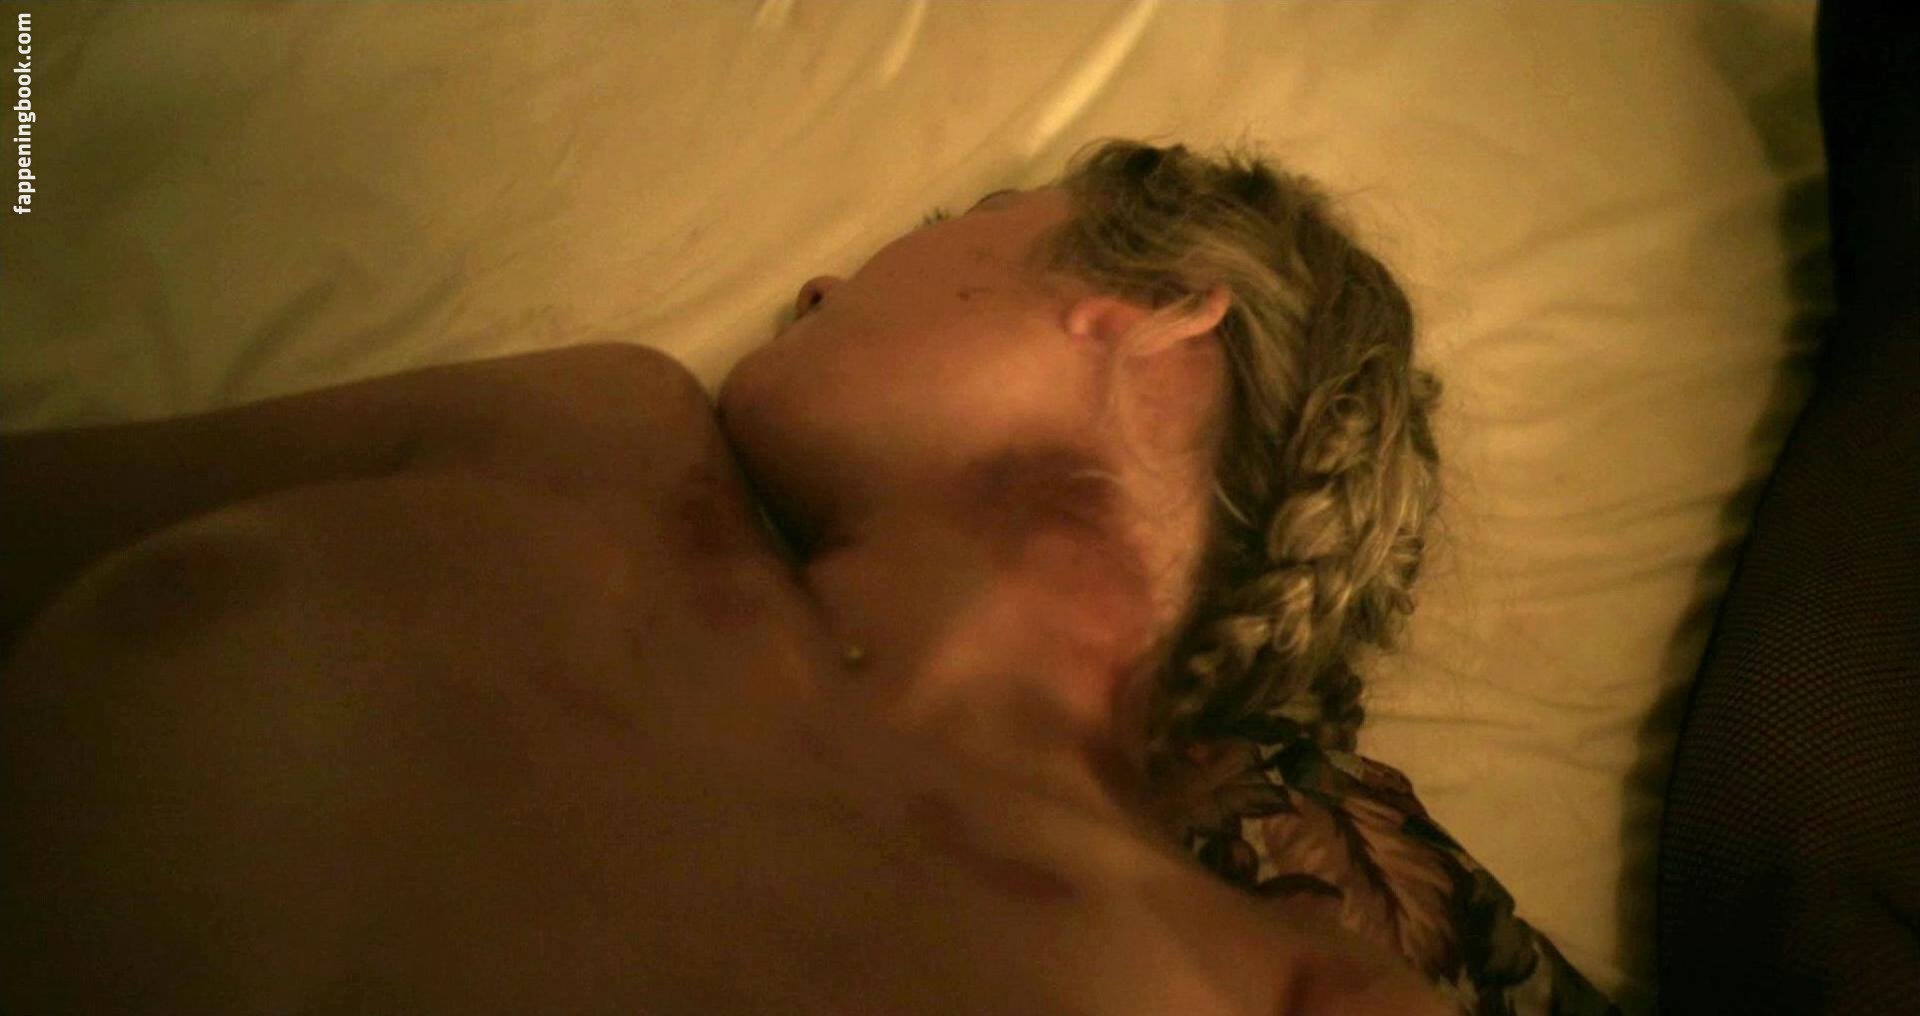 Caroline Mitchell Nude, The Fappening - Photo #103047 - FappeningBook.